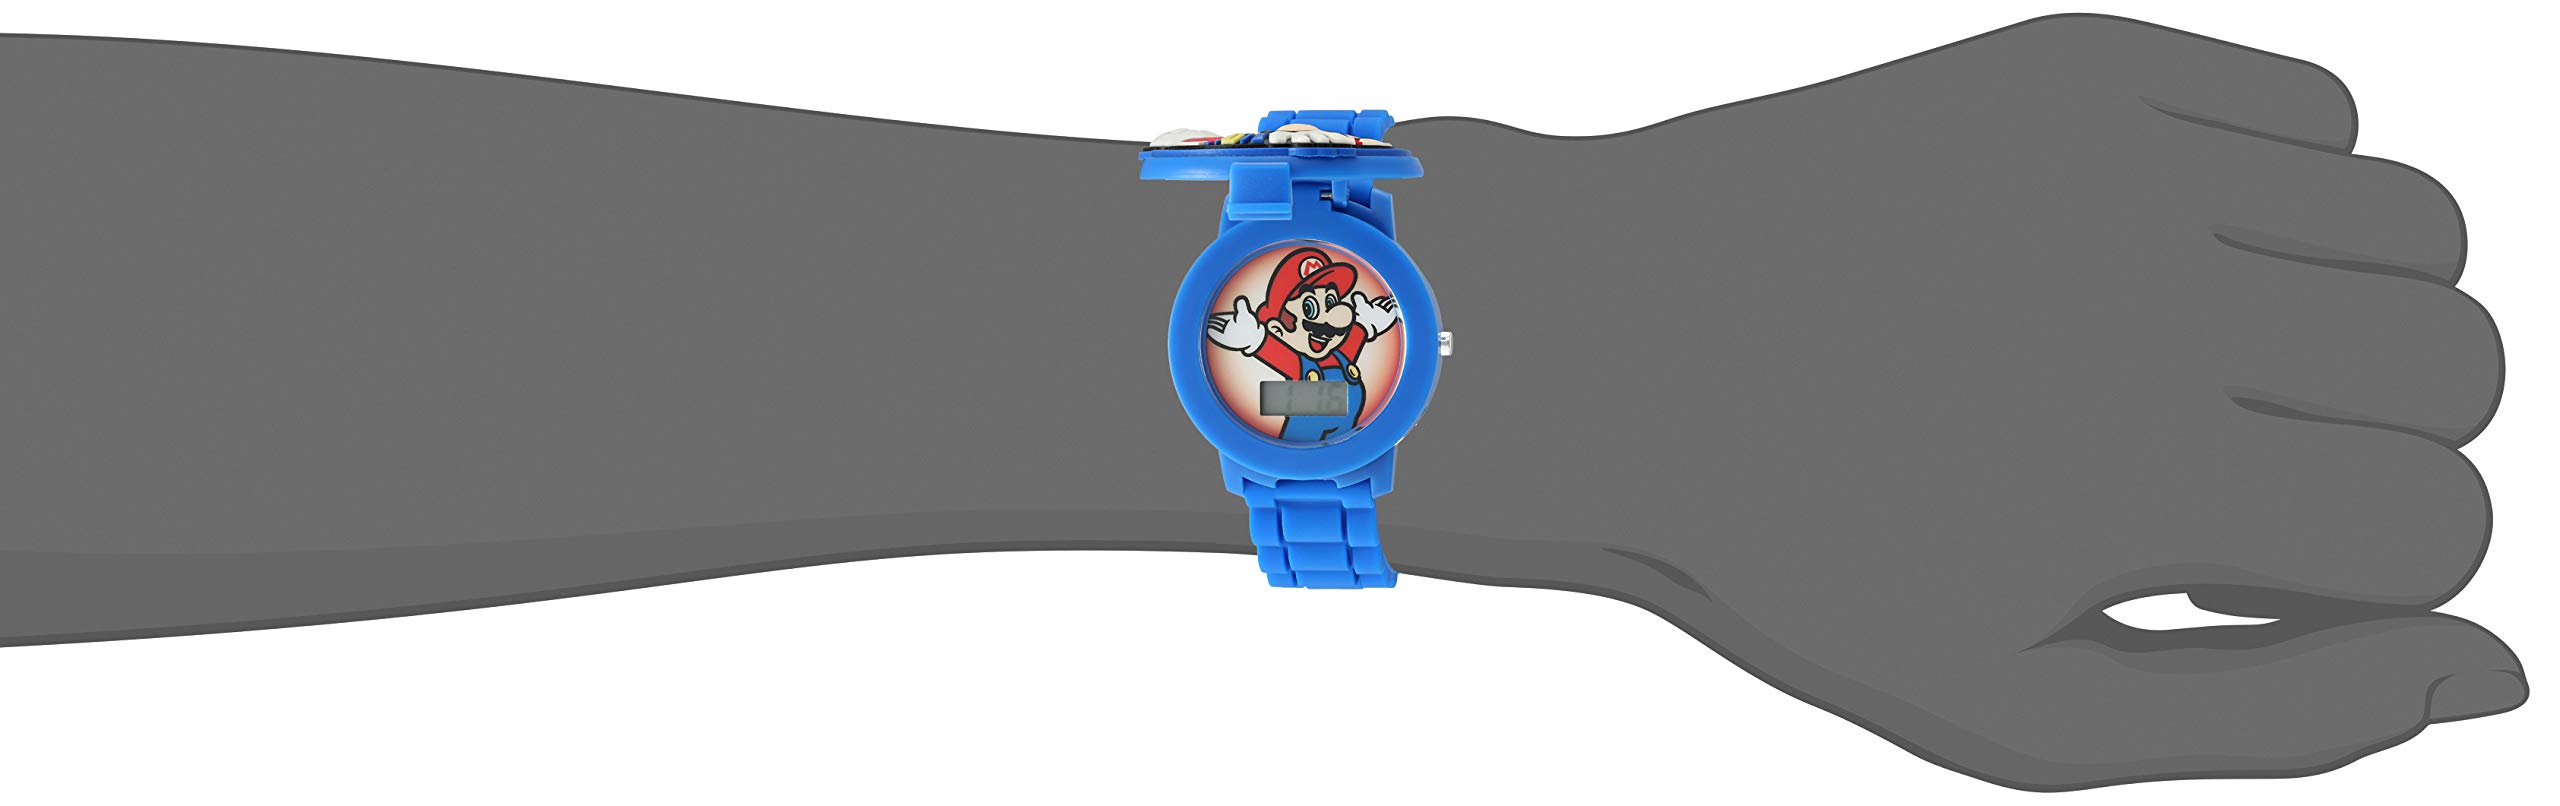 Accutime Kids Nintendo Super Mario Kart Luigi Bowser Digital LCD Quartz Wrist Watch, Cool Inexpensive Gift & Party Favor for Toddlers, Boys, Girls, Adults All Ages